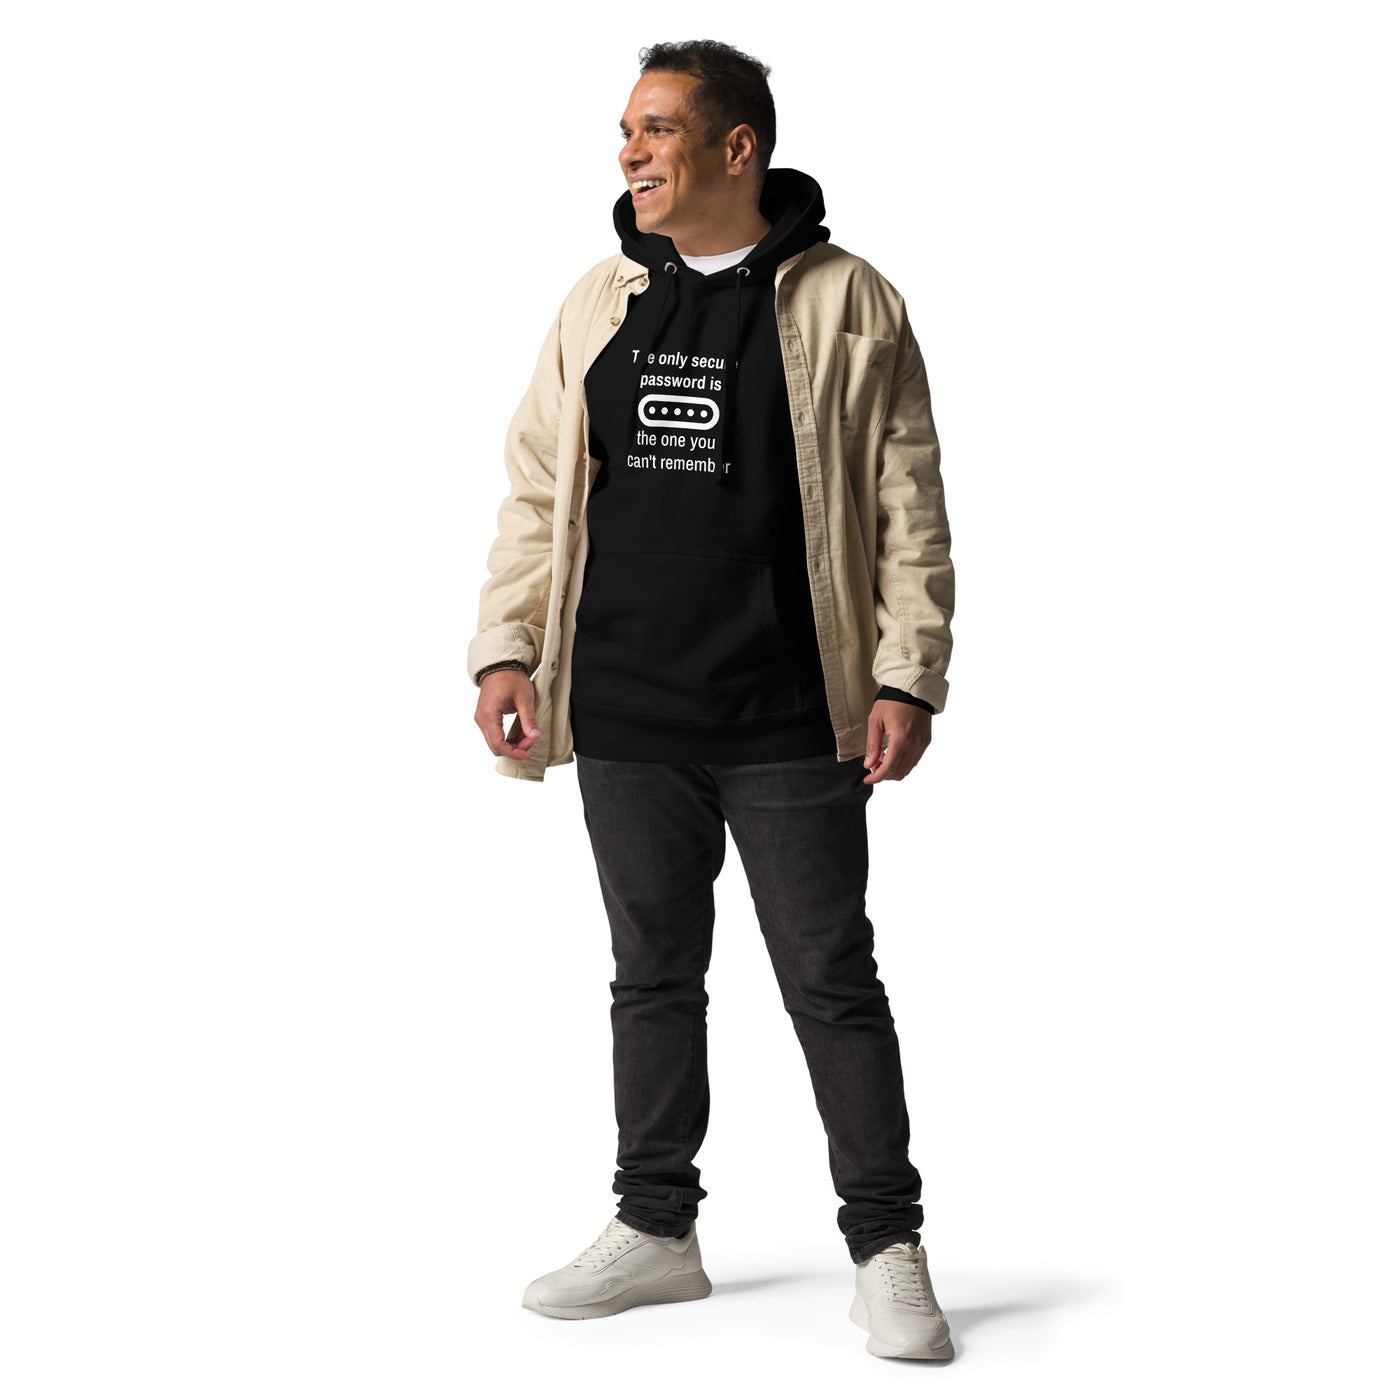 The Only Secure Password - V1 Unisex Hoodie